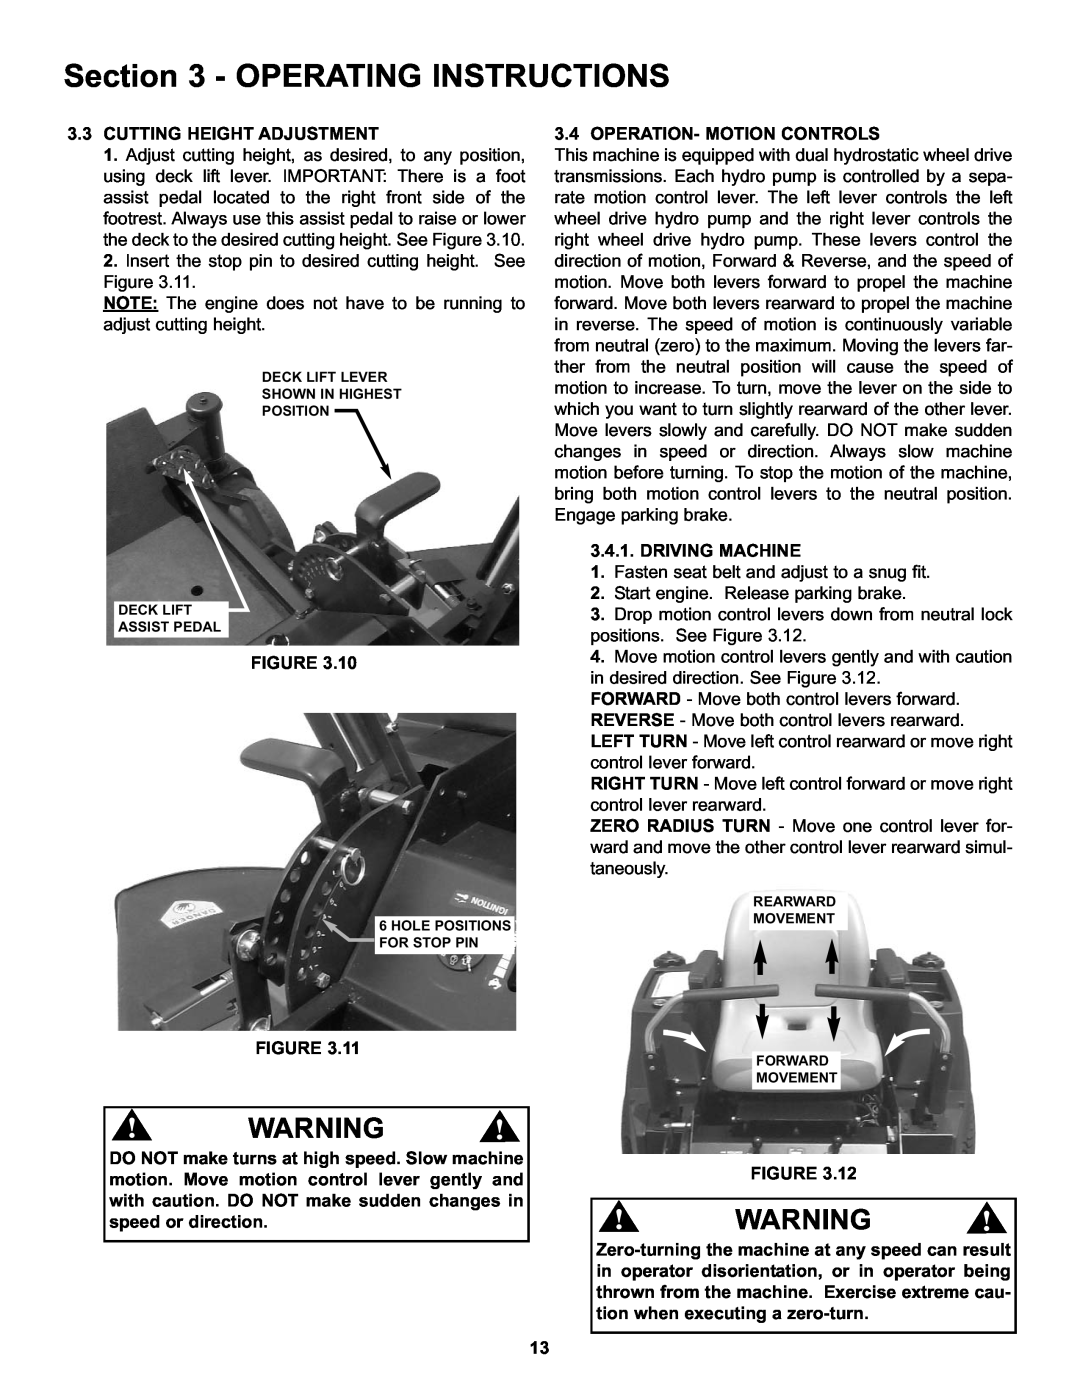 Snapper CZT19481KWV Operating Instructions, Cutting Height Adjustment, Operation- Motion Controls, Driving Machine 